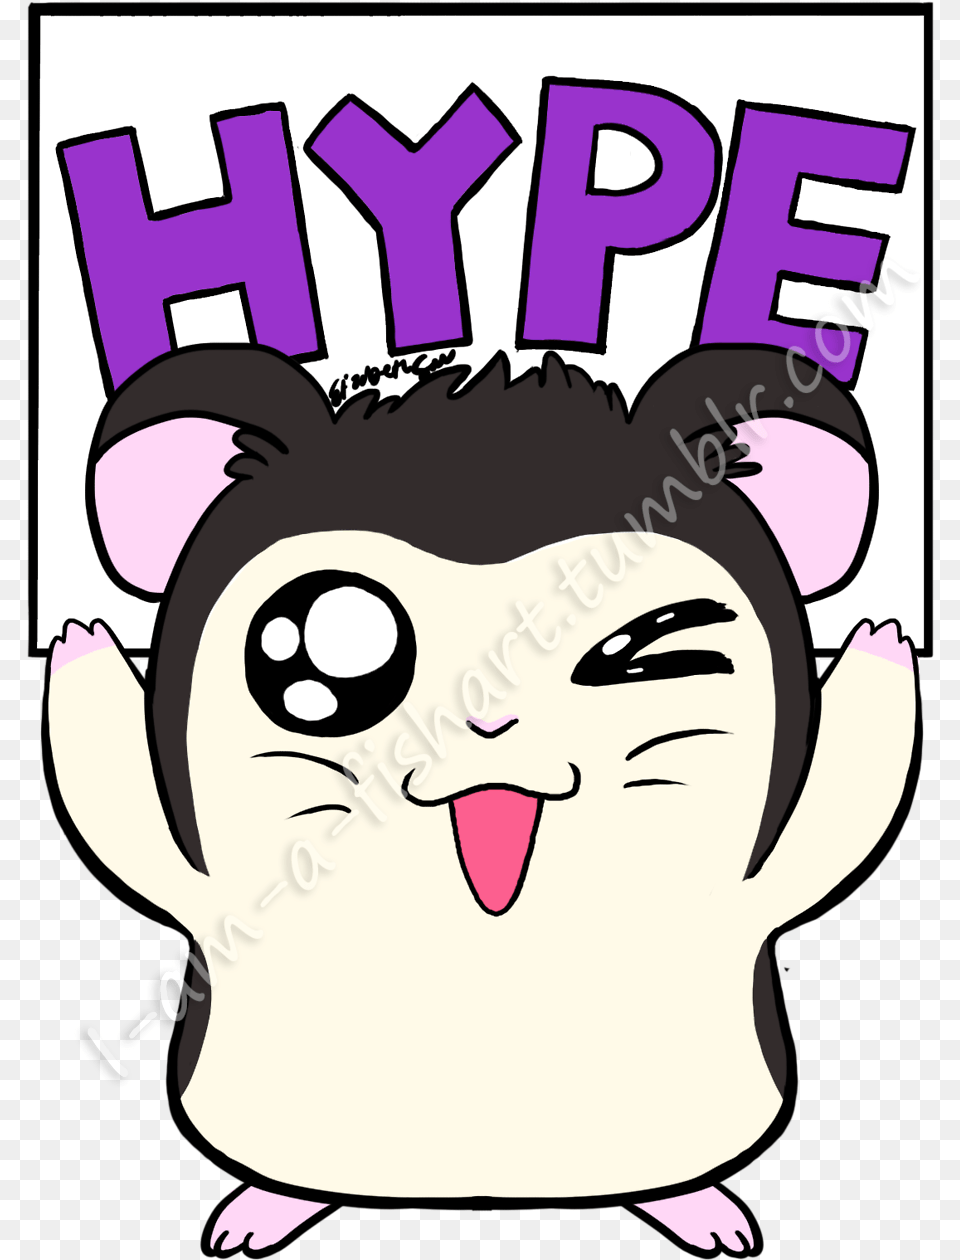 My First Commission A Twitch Emote Commissioned By Art, Book, Comics, Publication, Baby Png Image